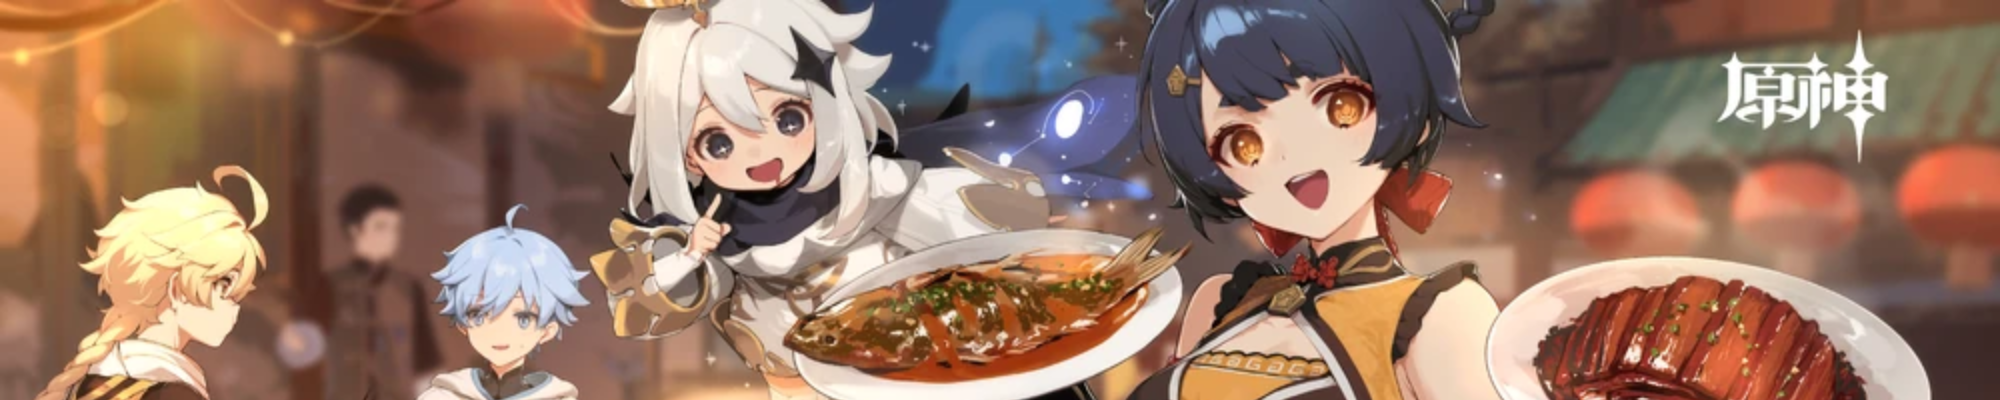 an image of xiangling from genshin impact serving up two food dishes, with paimon looking at one of them and aether and chongyun sitting at a table in the background - released for chinese new year 2022